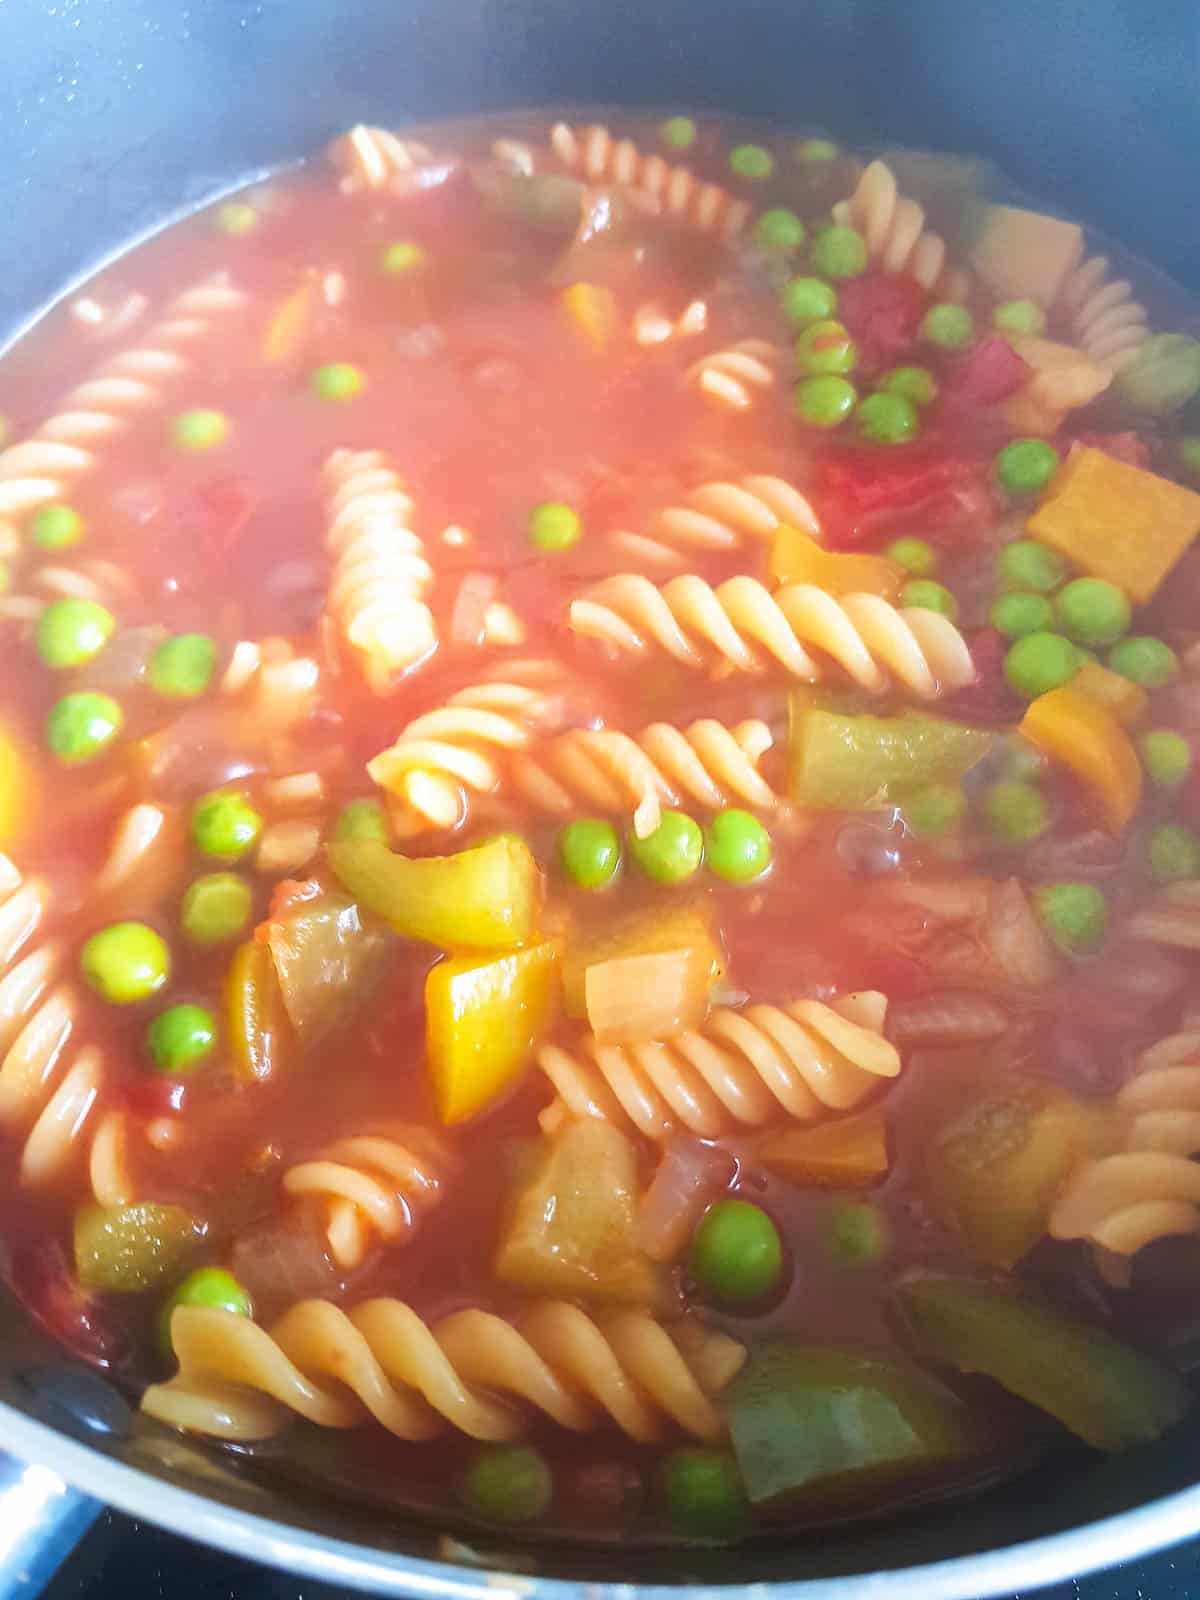 Peas, chicken and tomatoes added to the pasta.